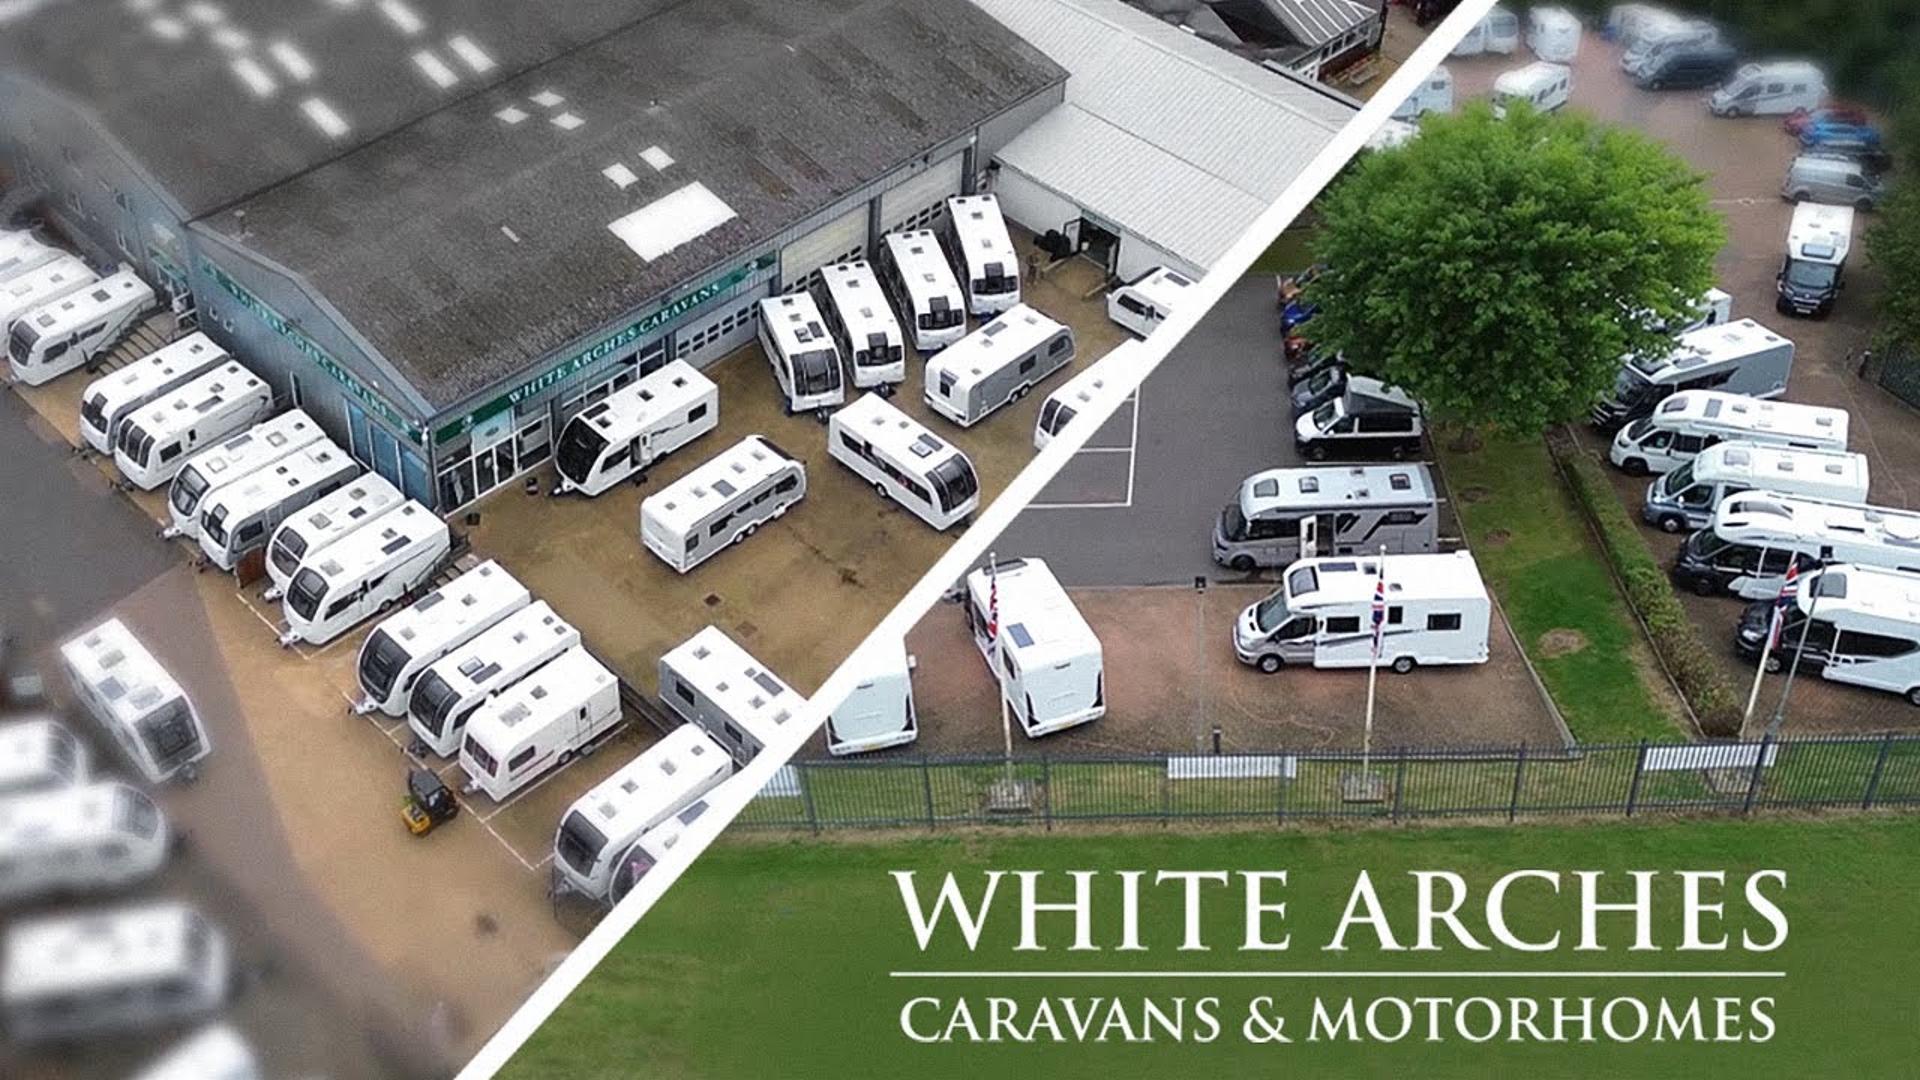 Caravan and motorhome retailer acquired out of administration